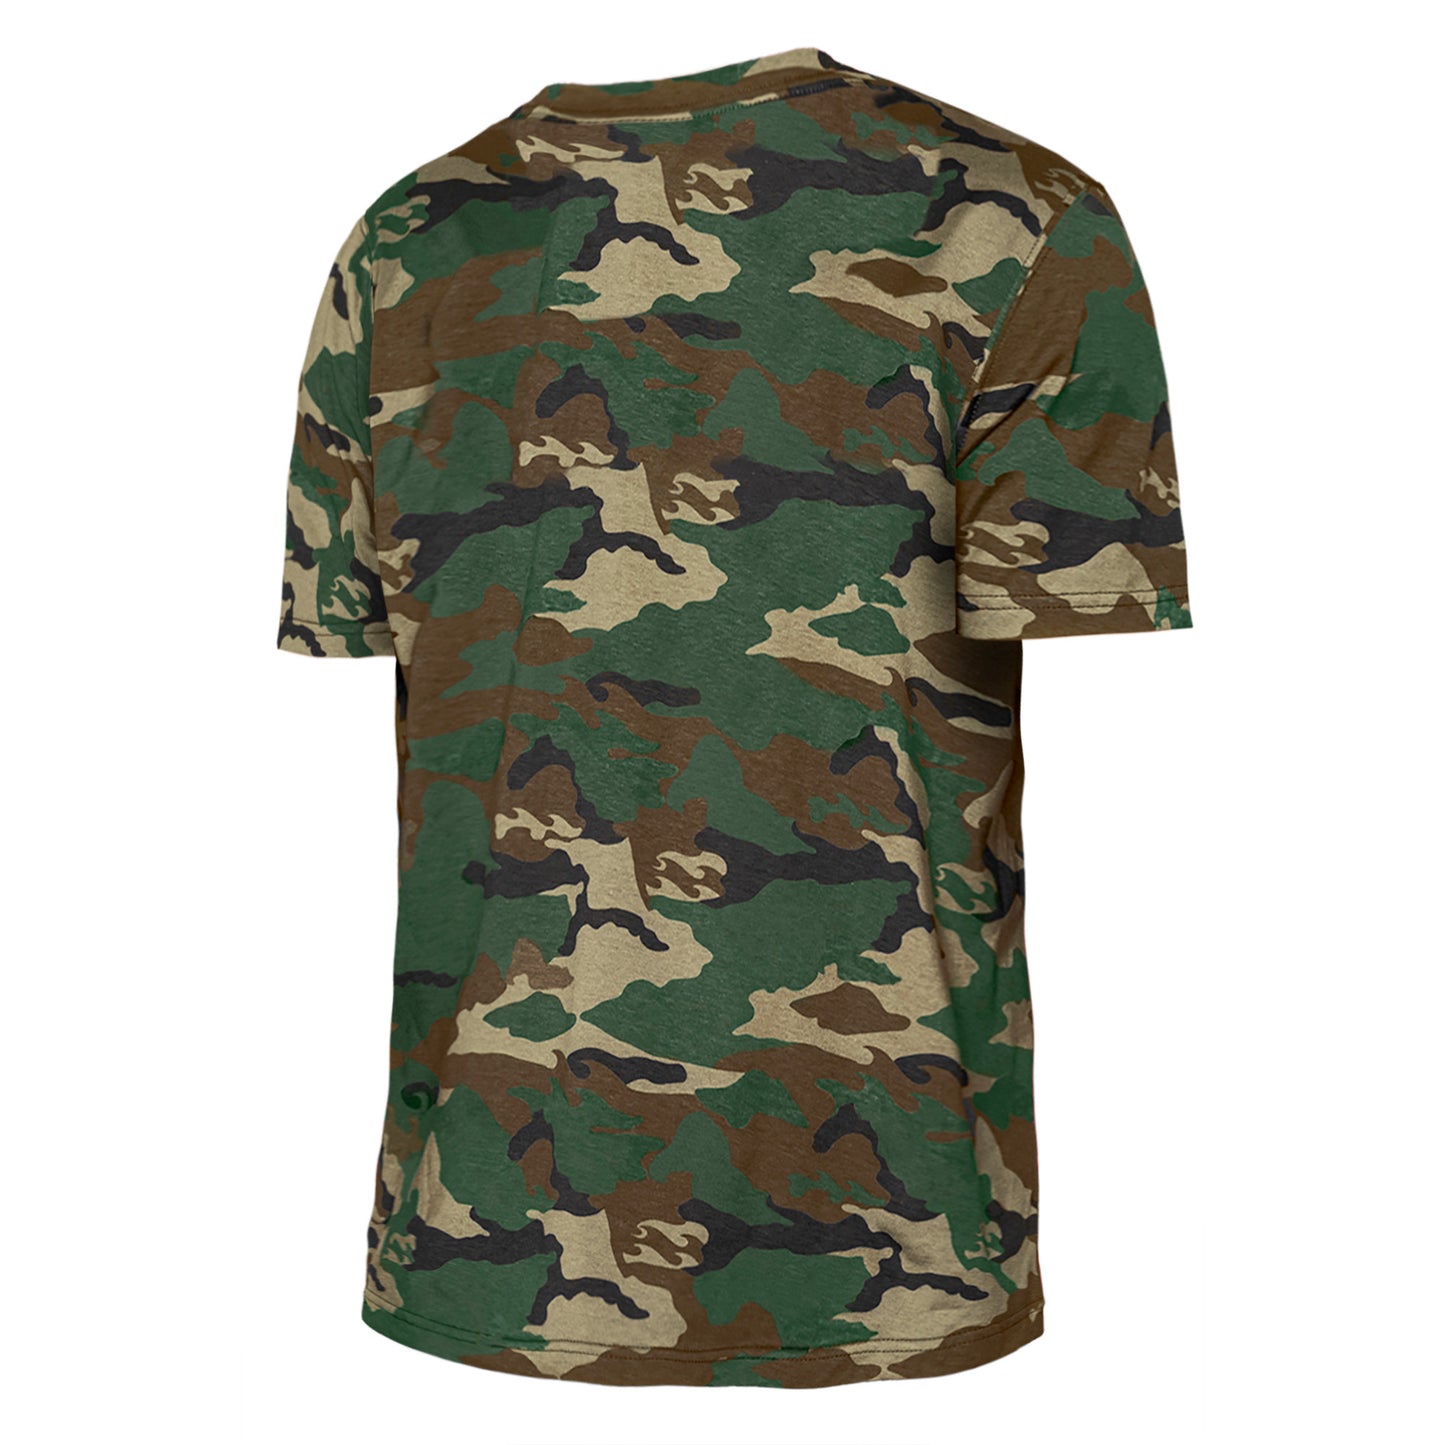 Chicago White Sox Alpha Industries Camo Short Sleeve T-Shirt Olive/Camo